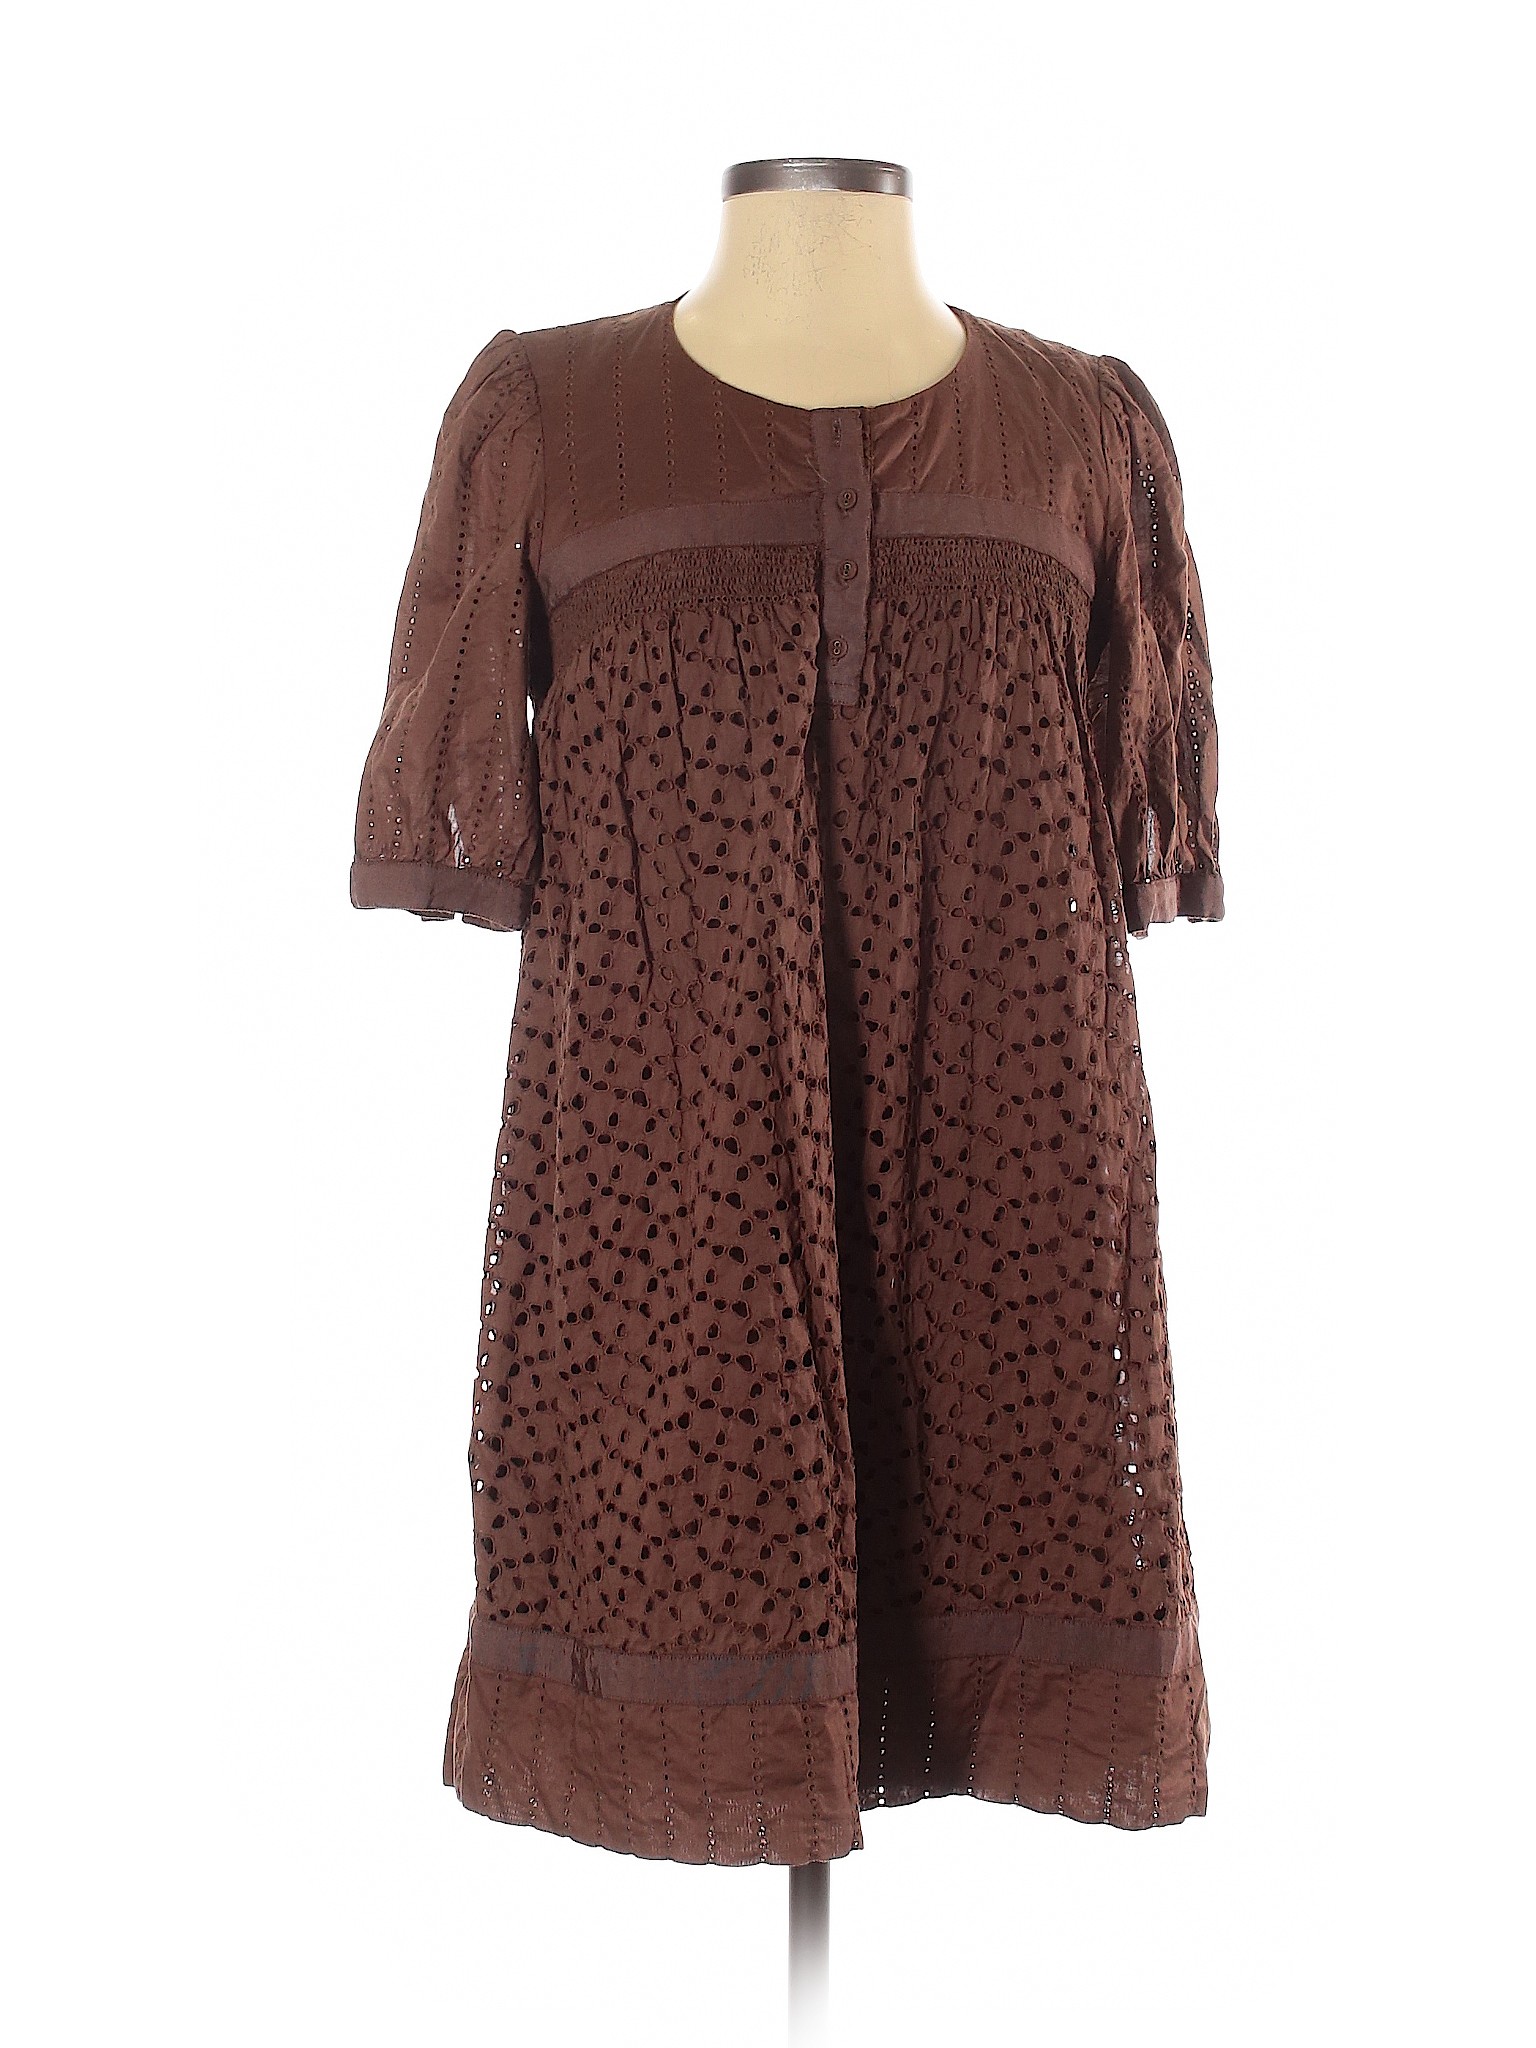 Laundry by Design Women Brown Casual Dress 2 Petites | eBay